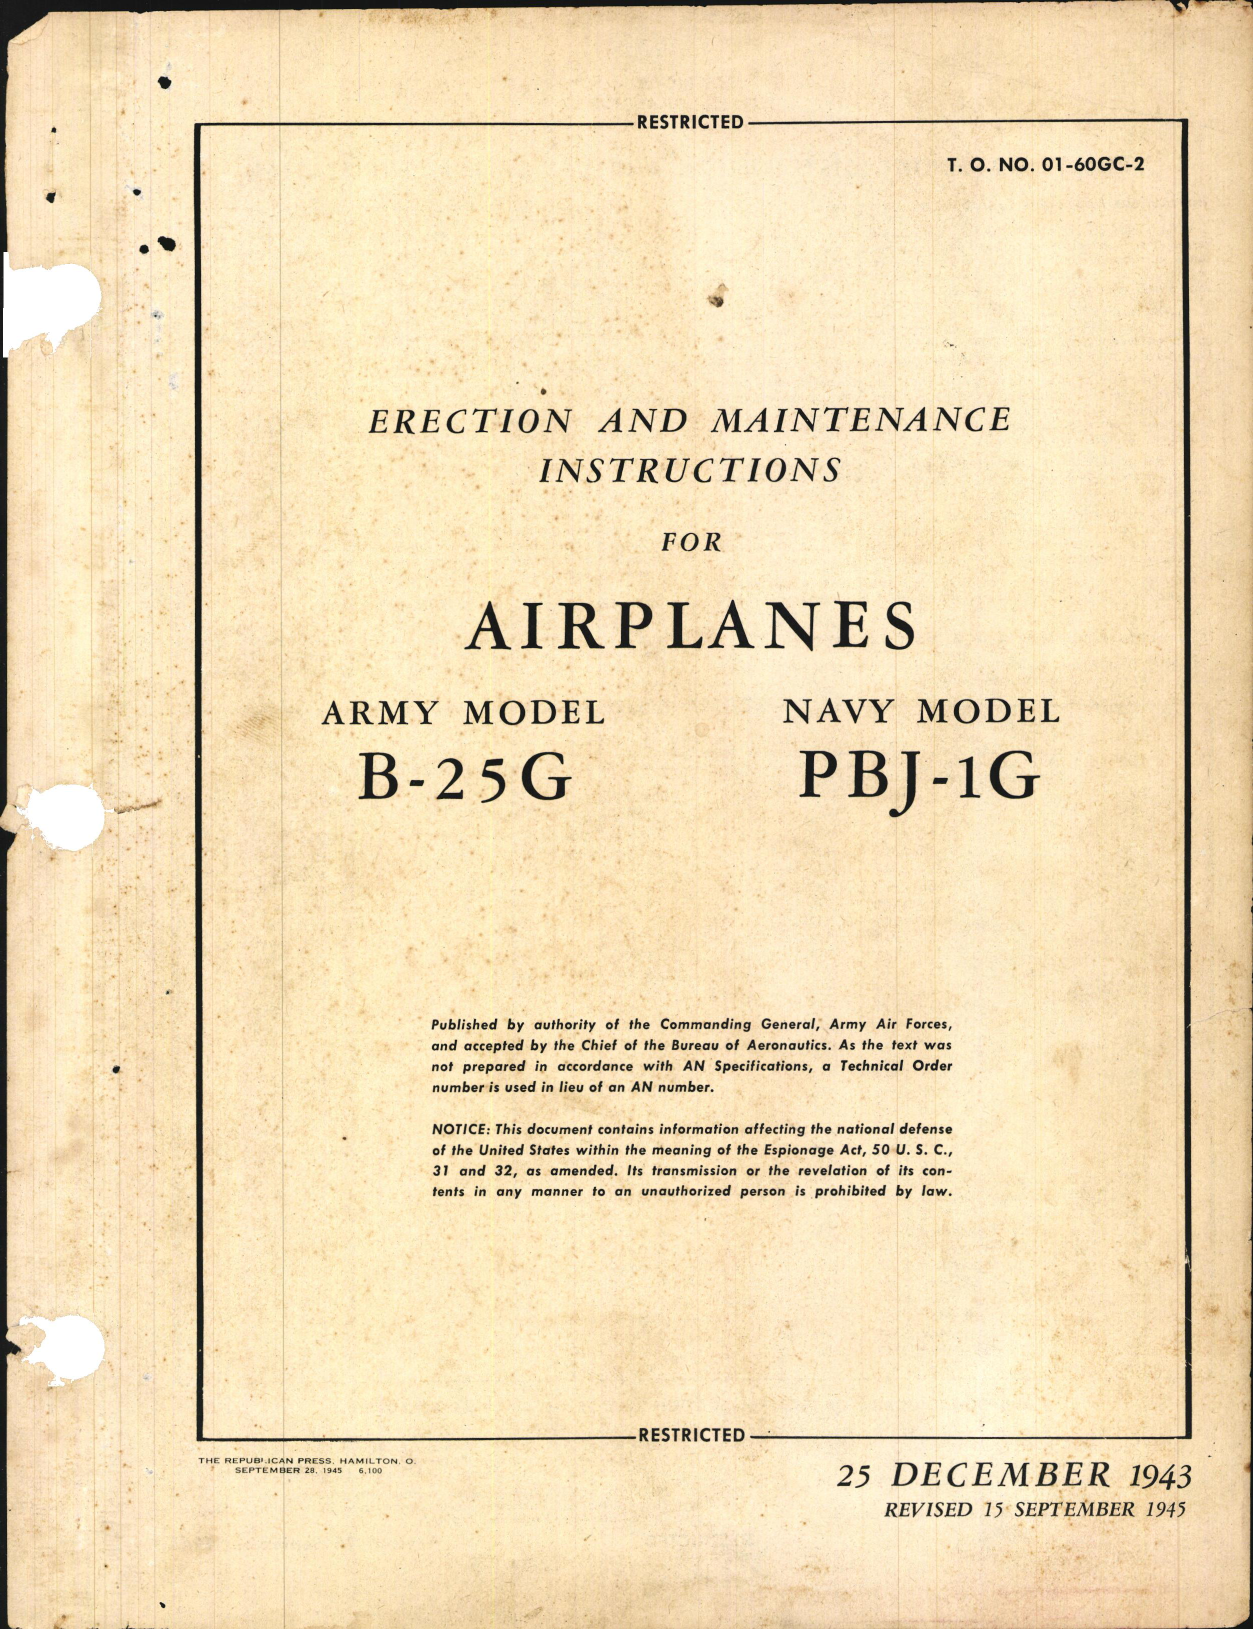 Sample page 1 from AirCorps Library document: Erection and Maintenance Instructions for B-25G and PBJ-1G Airplanes